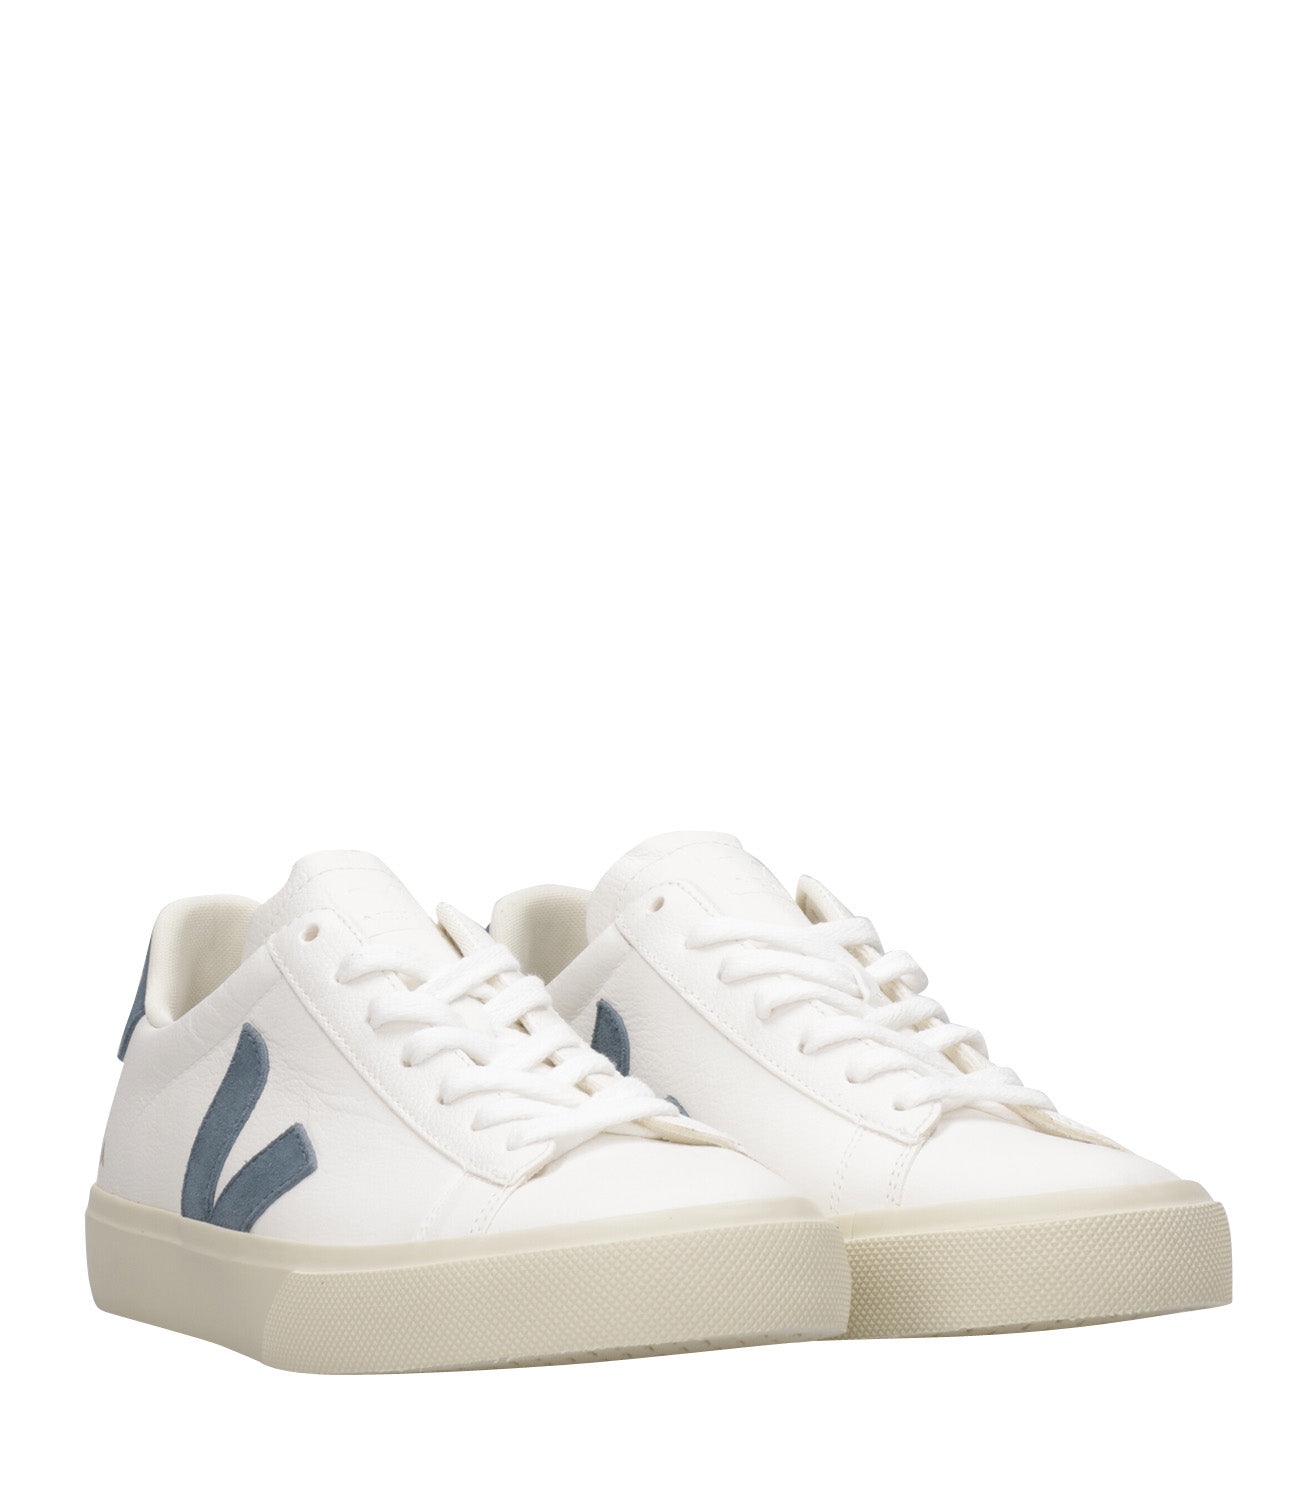 Veja | Field Sneakers White and Blue